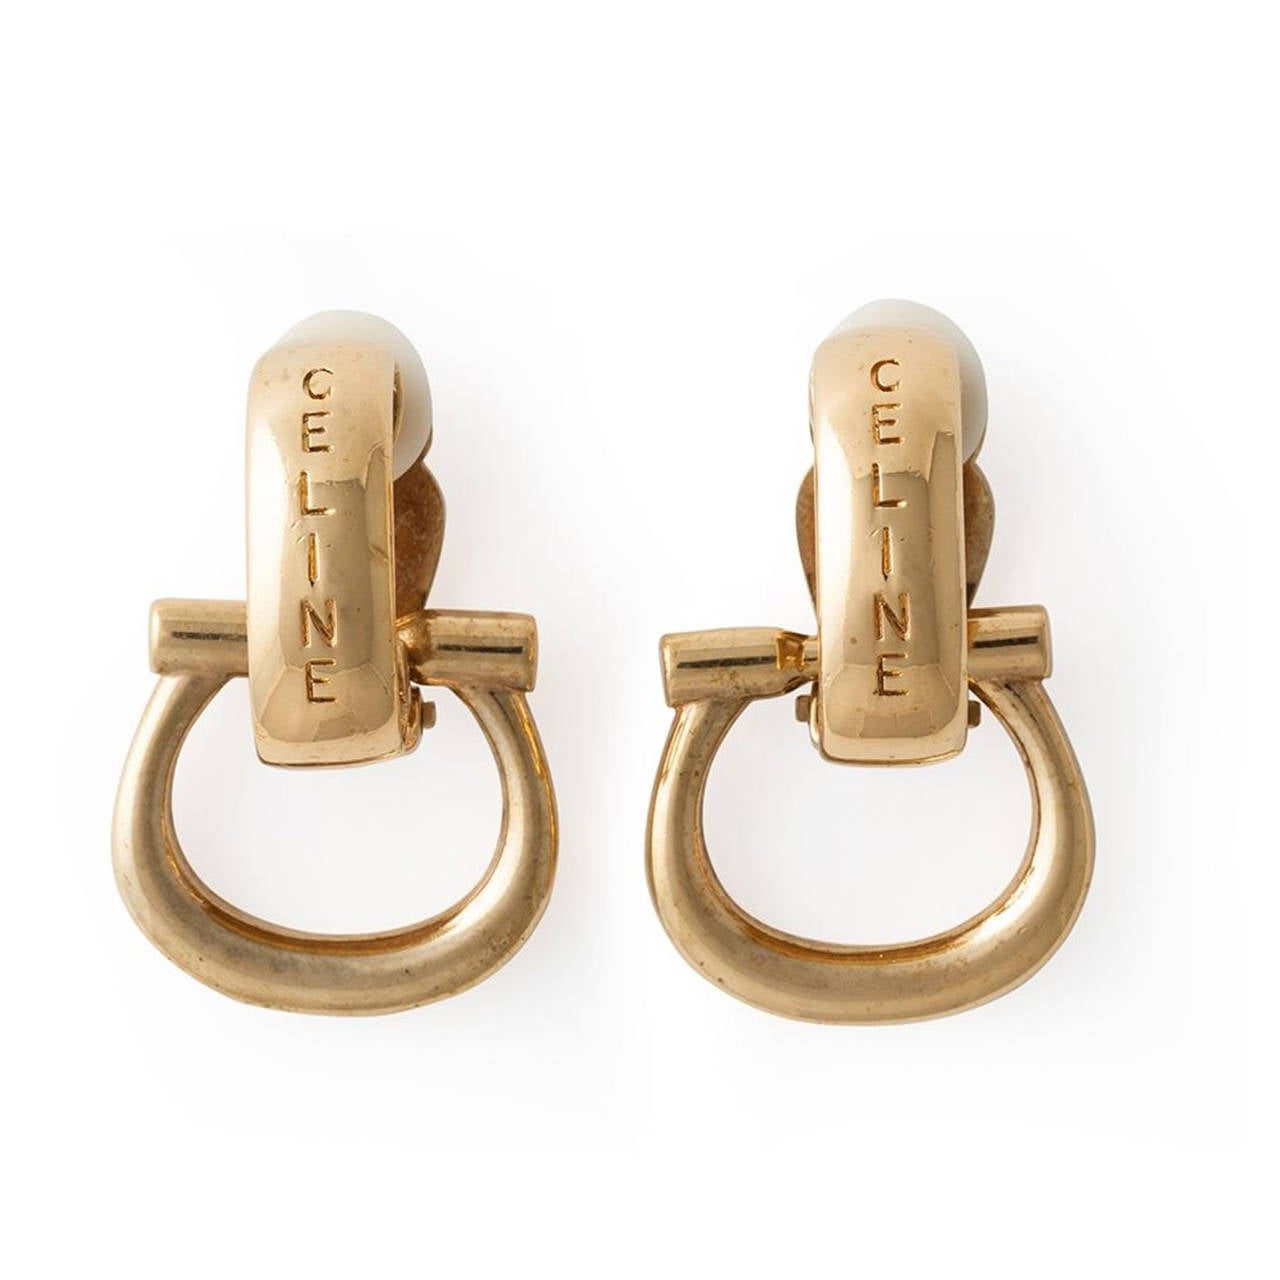 These vintage Gold-tone earrings from Céline come with two pairs of pendants that can be swapped, these both feature the brands iconic logoing.

Measurements: Height: 4cm, Width: 2.5cm

Material: Gold-tone Metal

Colour: Gold